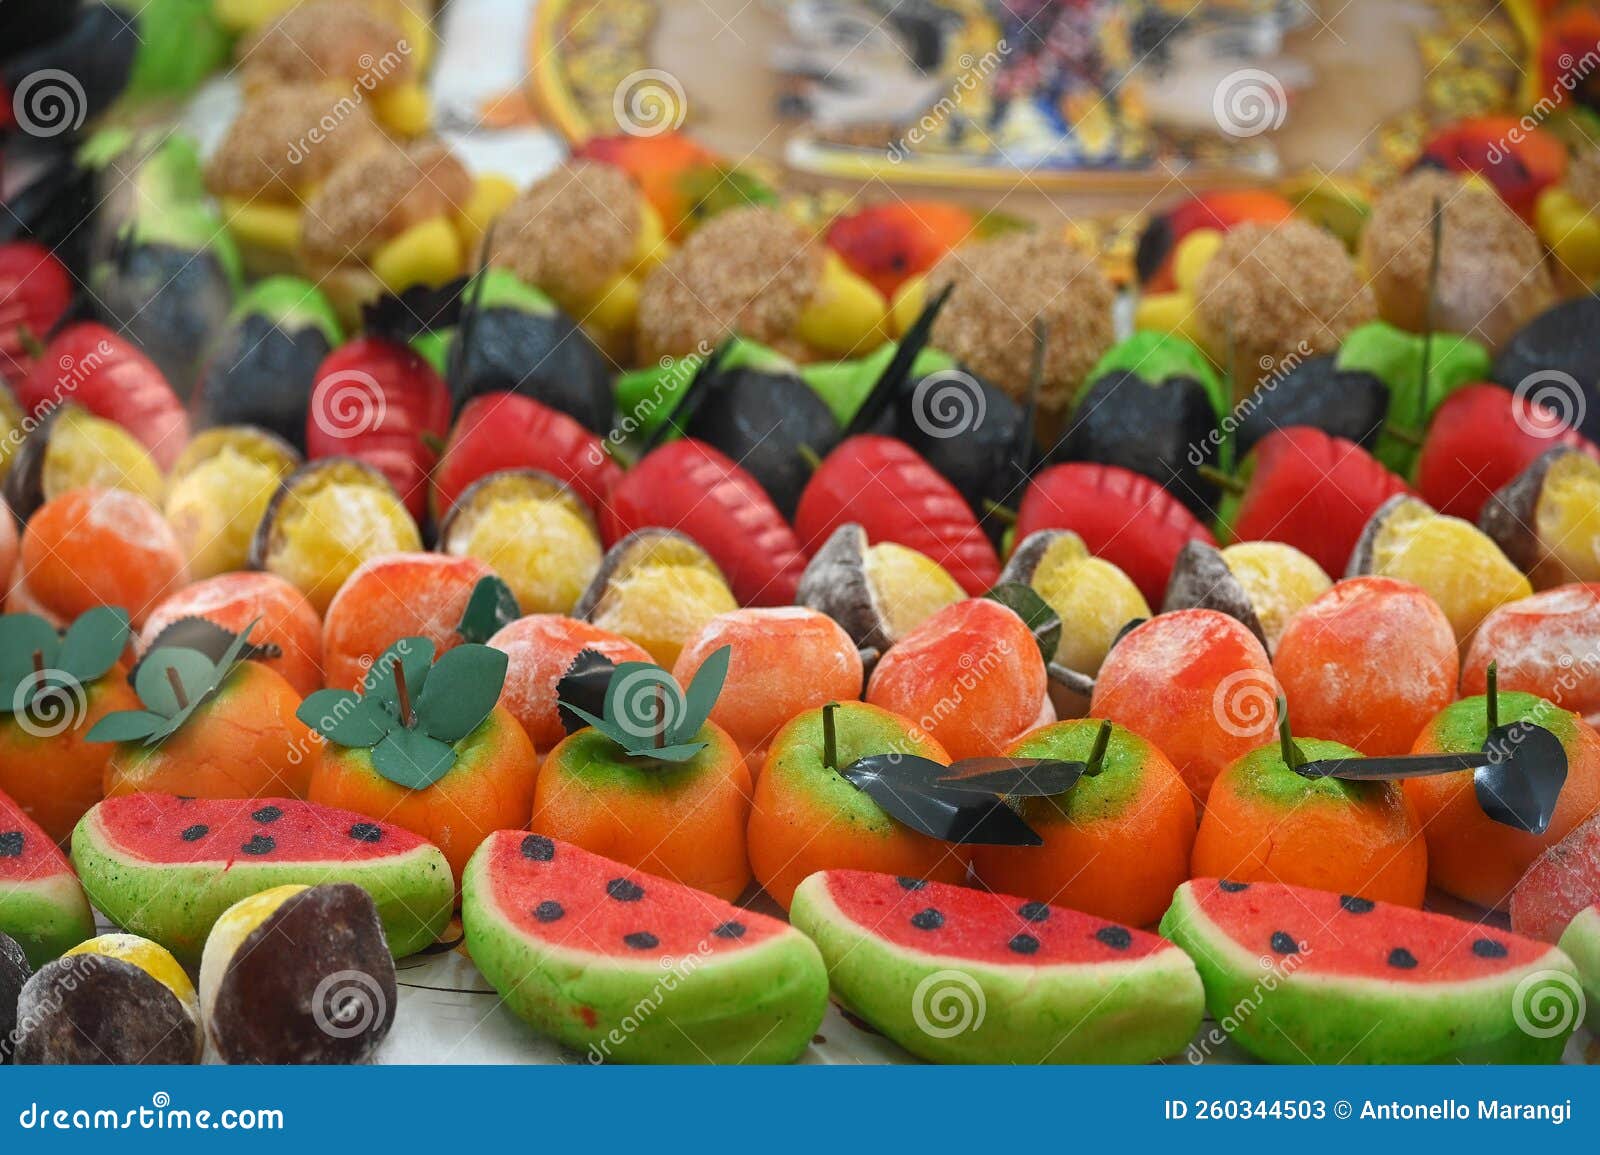 traditional sicilian frutta martorana assortment made of almond paste d in various fruits and veggies